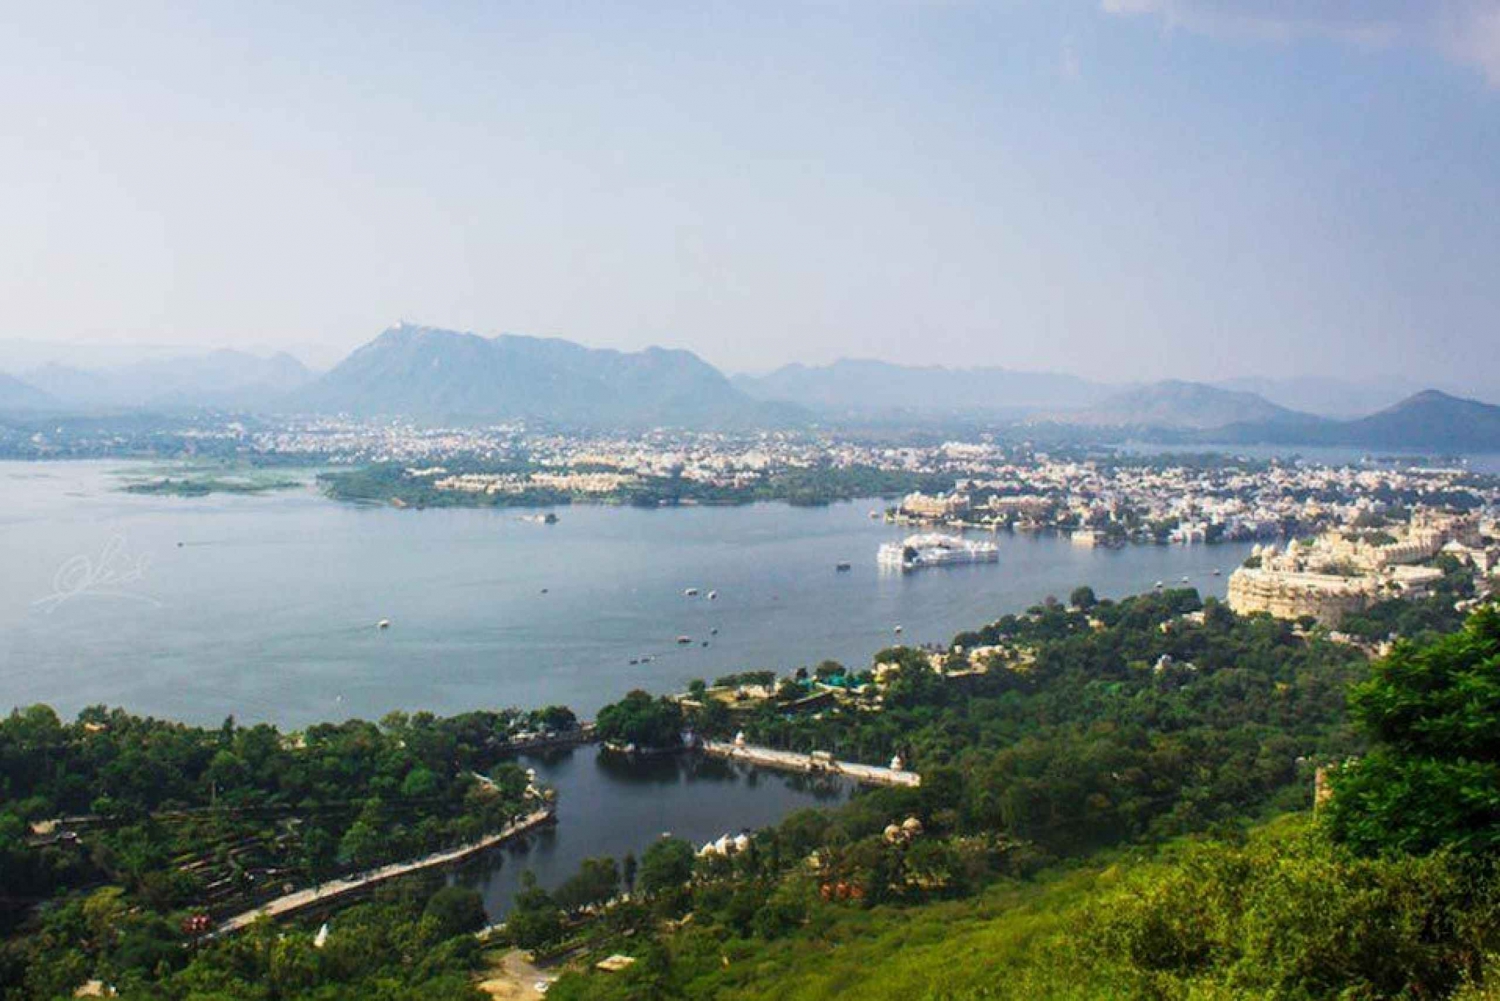 Udaipur: Highlights of Udaipur, Guided Half-Day Car Tour